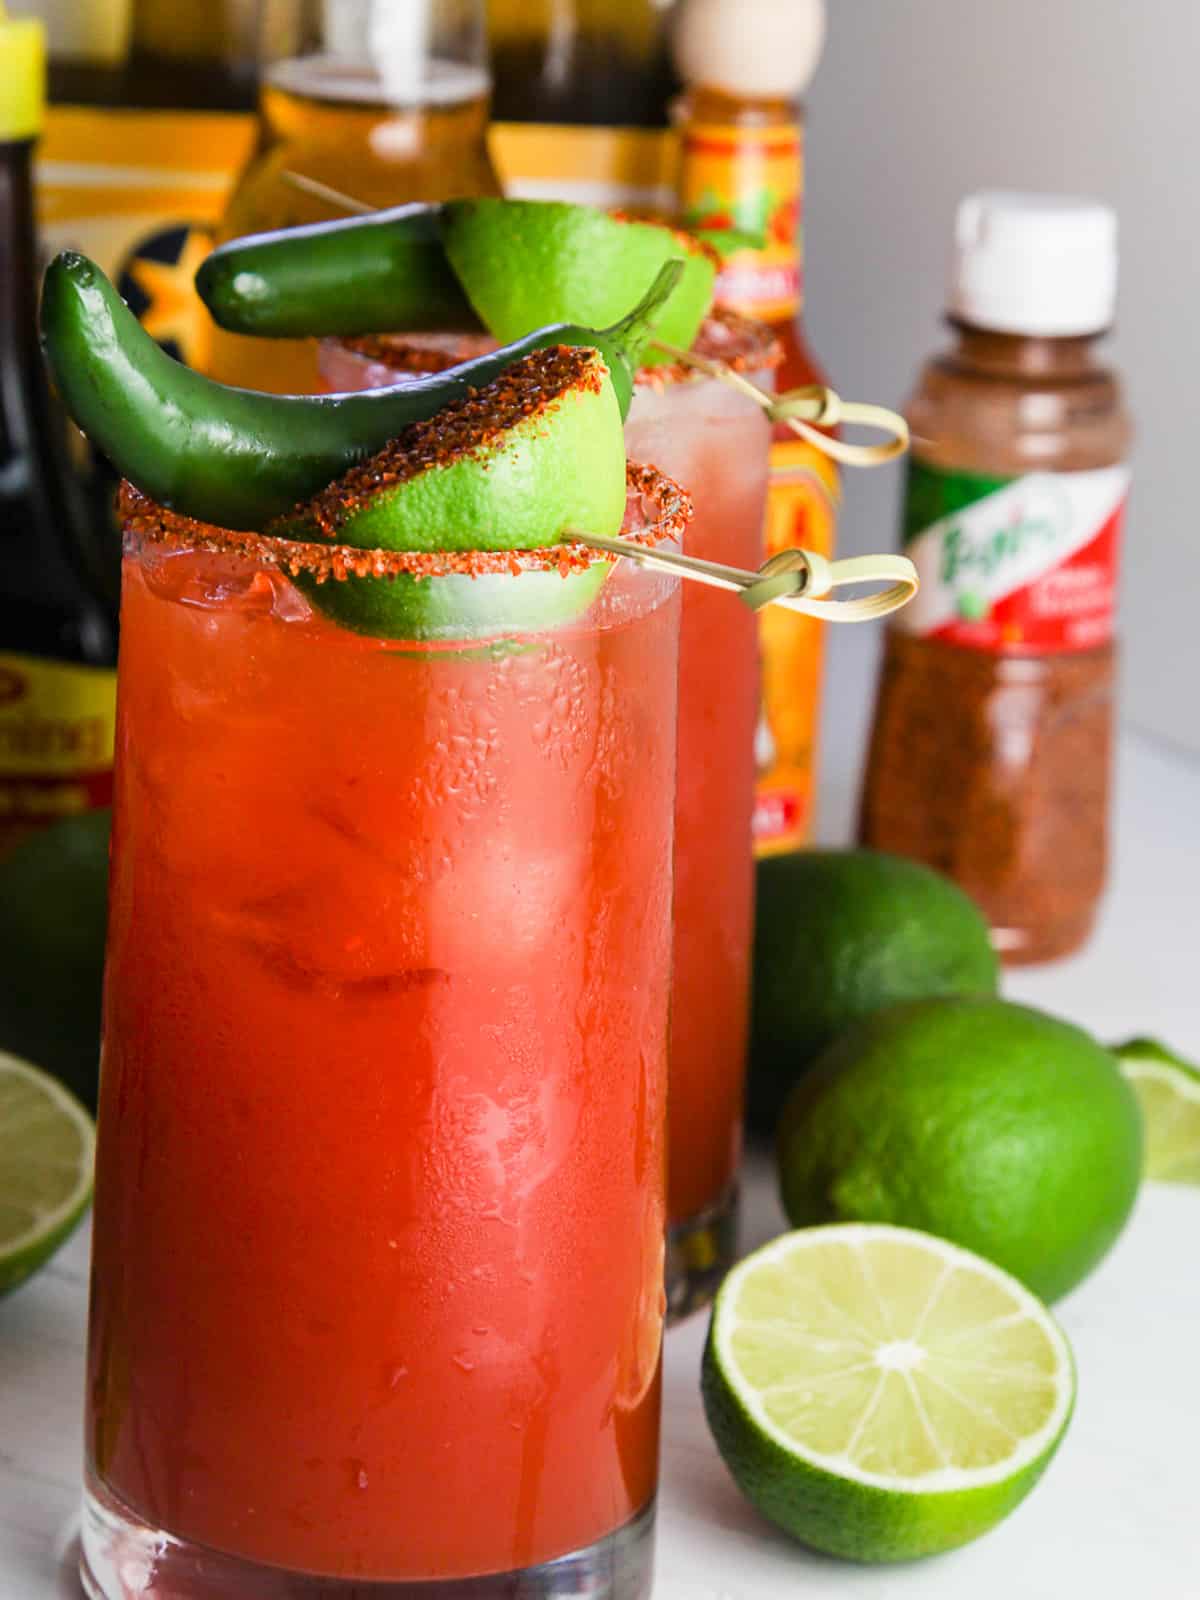 https://www.delicioustable.com/wp-content/uploads/2023/01/Michelada-ingredients-nearby.jpg